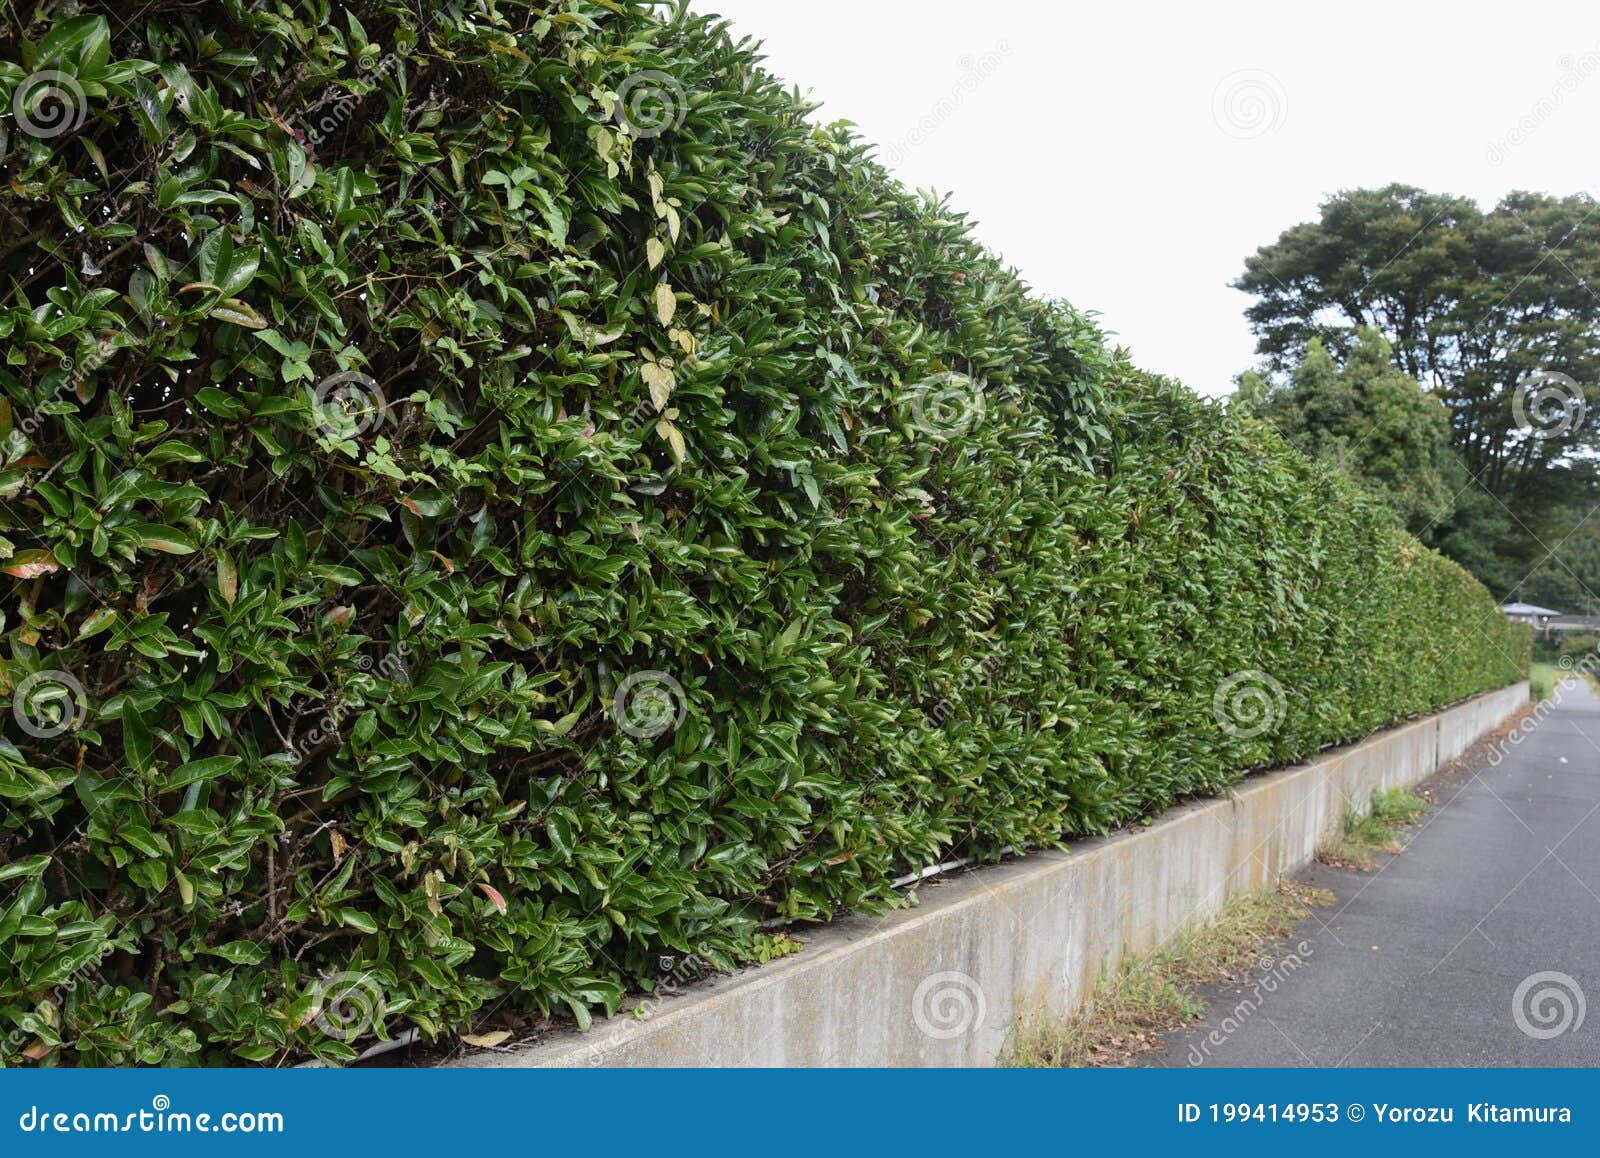 Hedge Made of Sweet Viburnum. Stock Image - Image of ornamental, coral ...